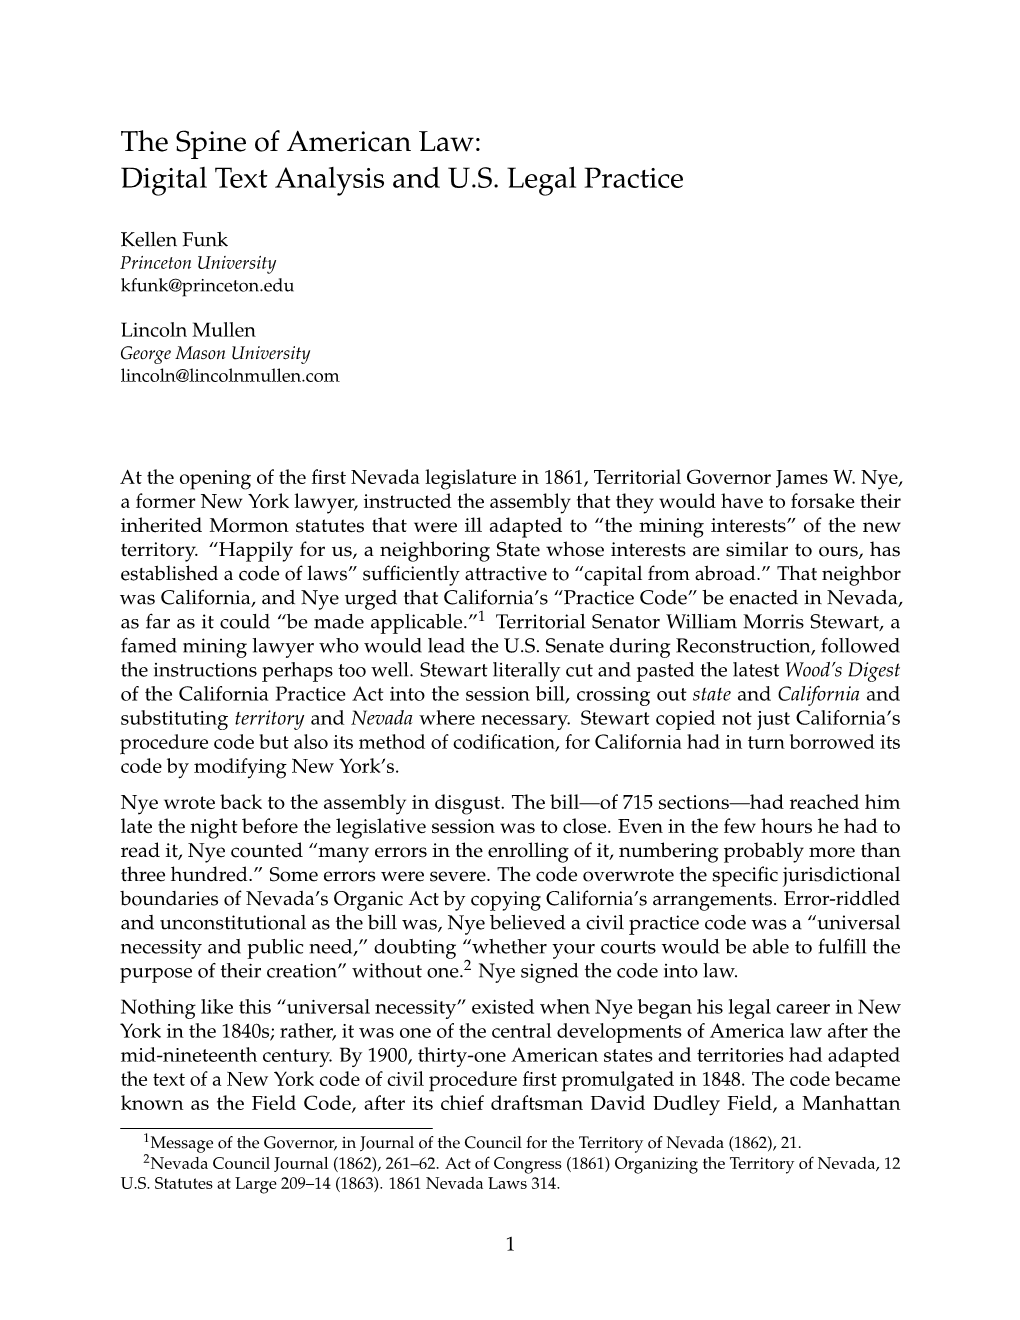 The Spine of American Law: Digital Text Analysis and U.S. Legal Practice